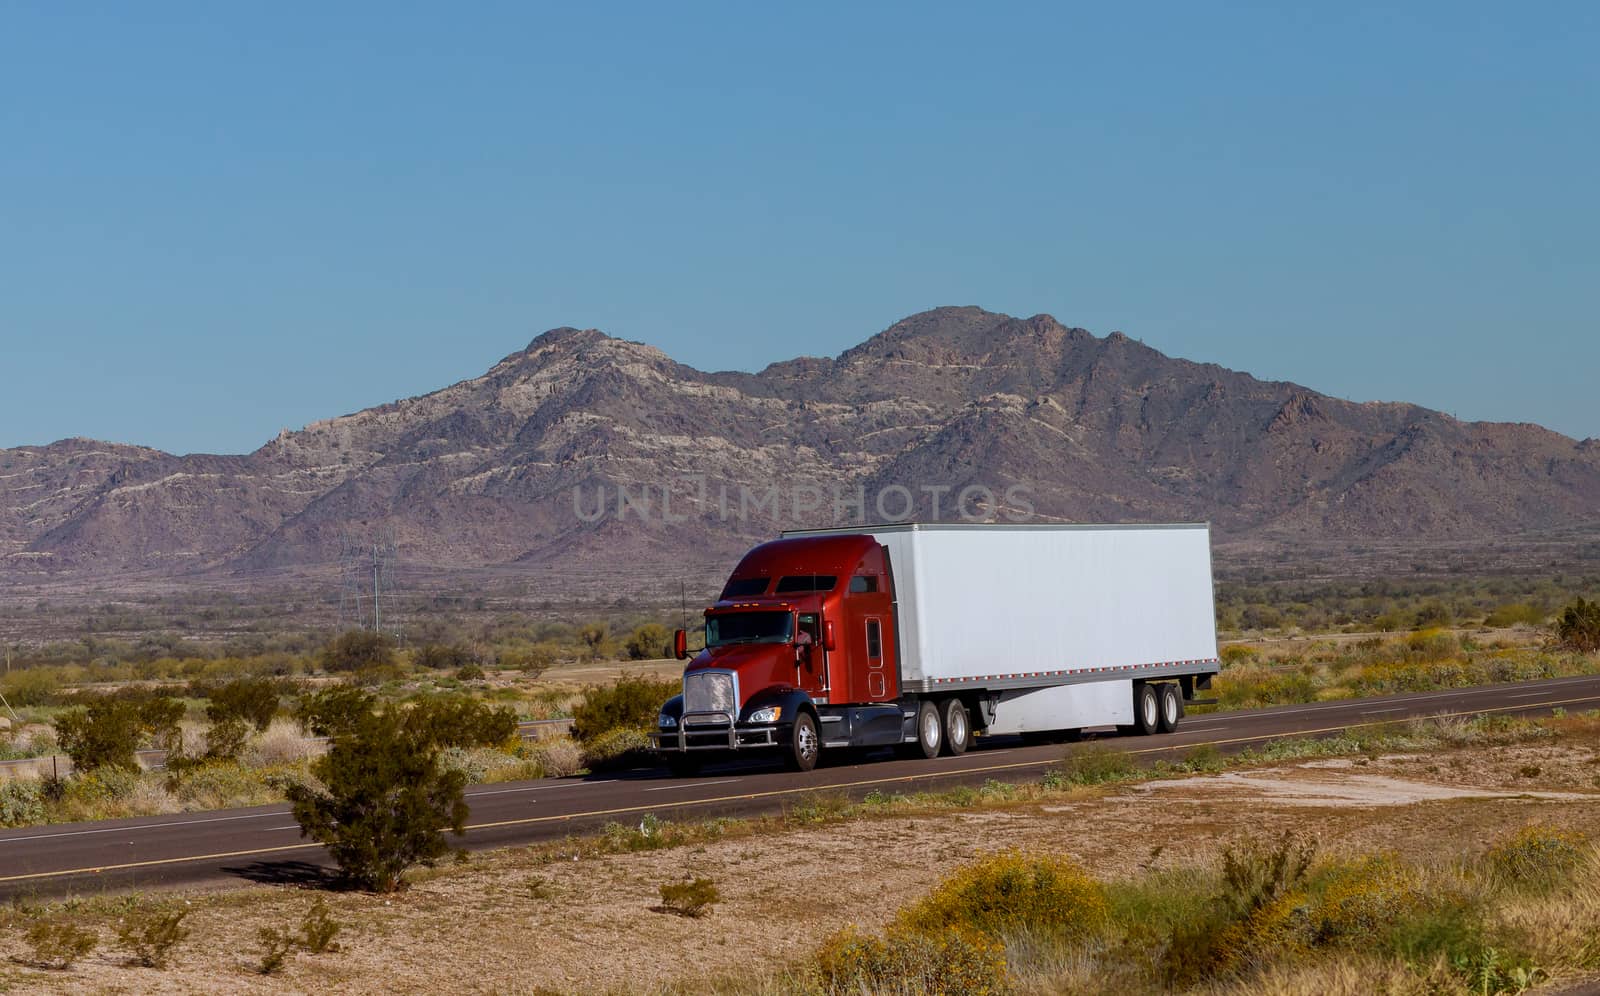 Classic big rig heavy duty long haul diesel semi truck with refrigerator semi trailer running on the road along mountains in USA